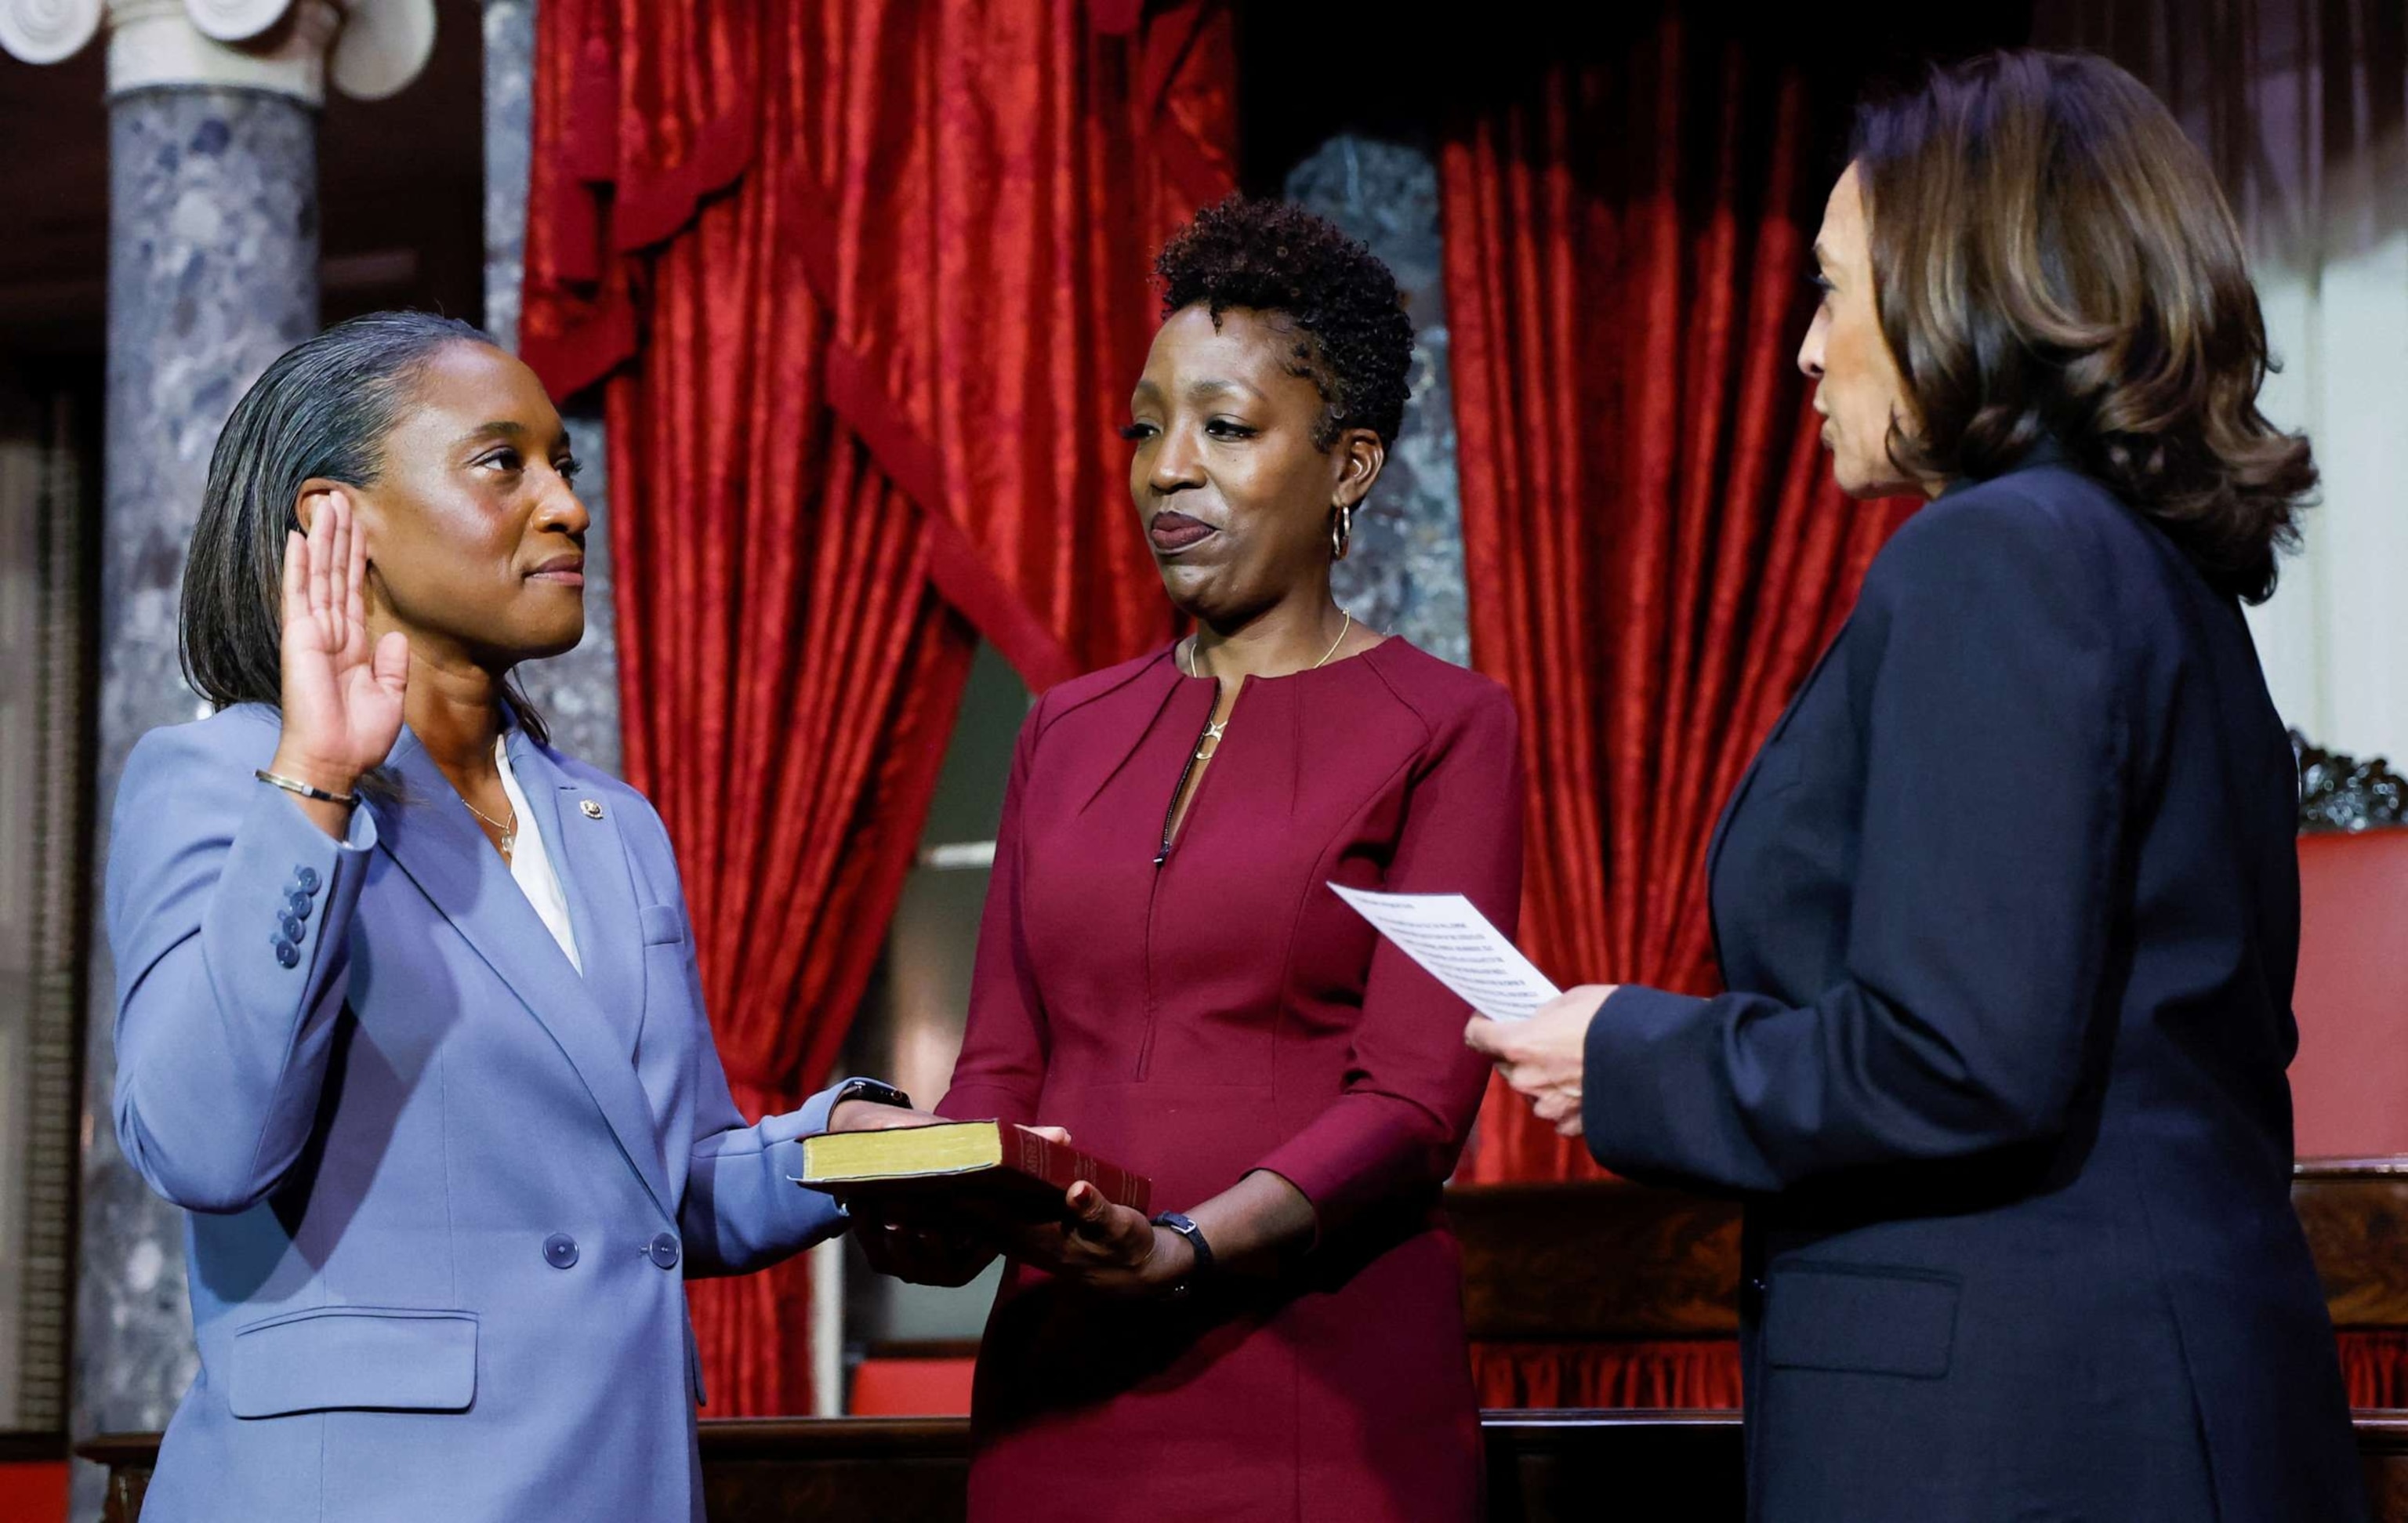 PHOTO: Vice President Kamala Harris swears in Laphonza Butler to fill the U.S. Senate vacancy left by the recently deceased Senator Dianne Feinstein, as Butler's wife, Neneki Lee, holds the bible, Oct. 3, 2023, at the Capitol in Washington, D.C.